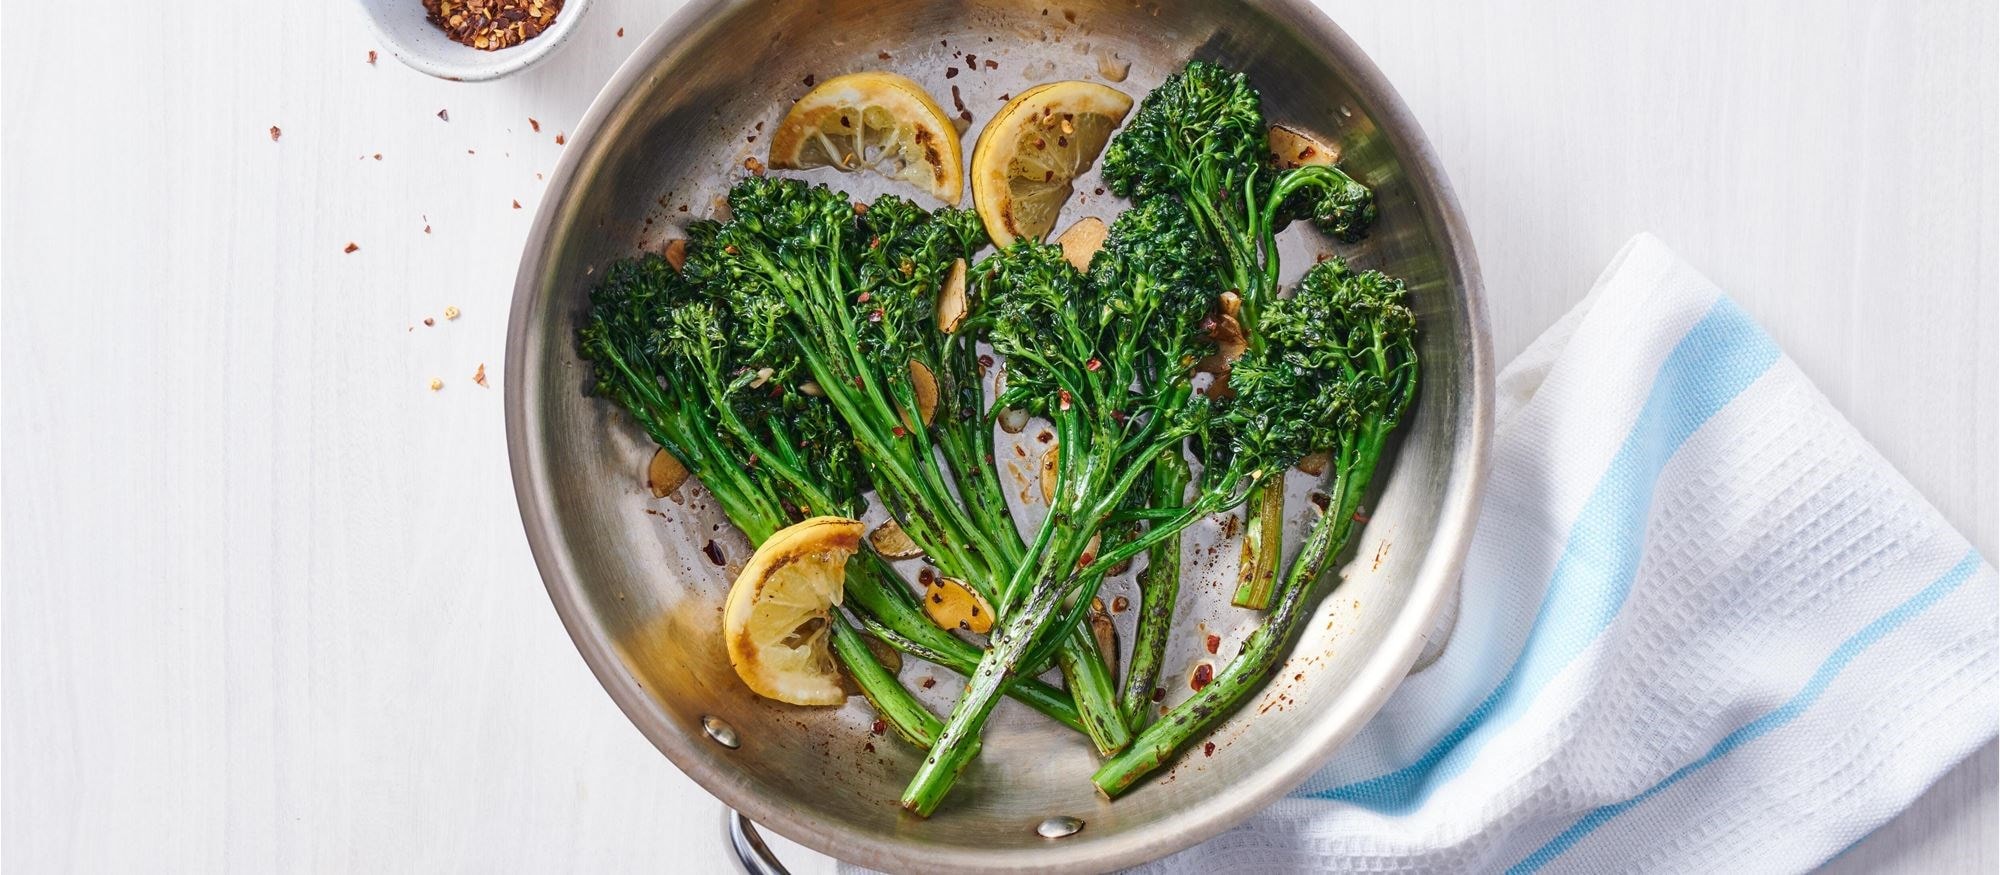 Easy and delicious Broccolini  recipe using the Blanch Mode setting of your Wolf Oven